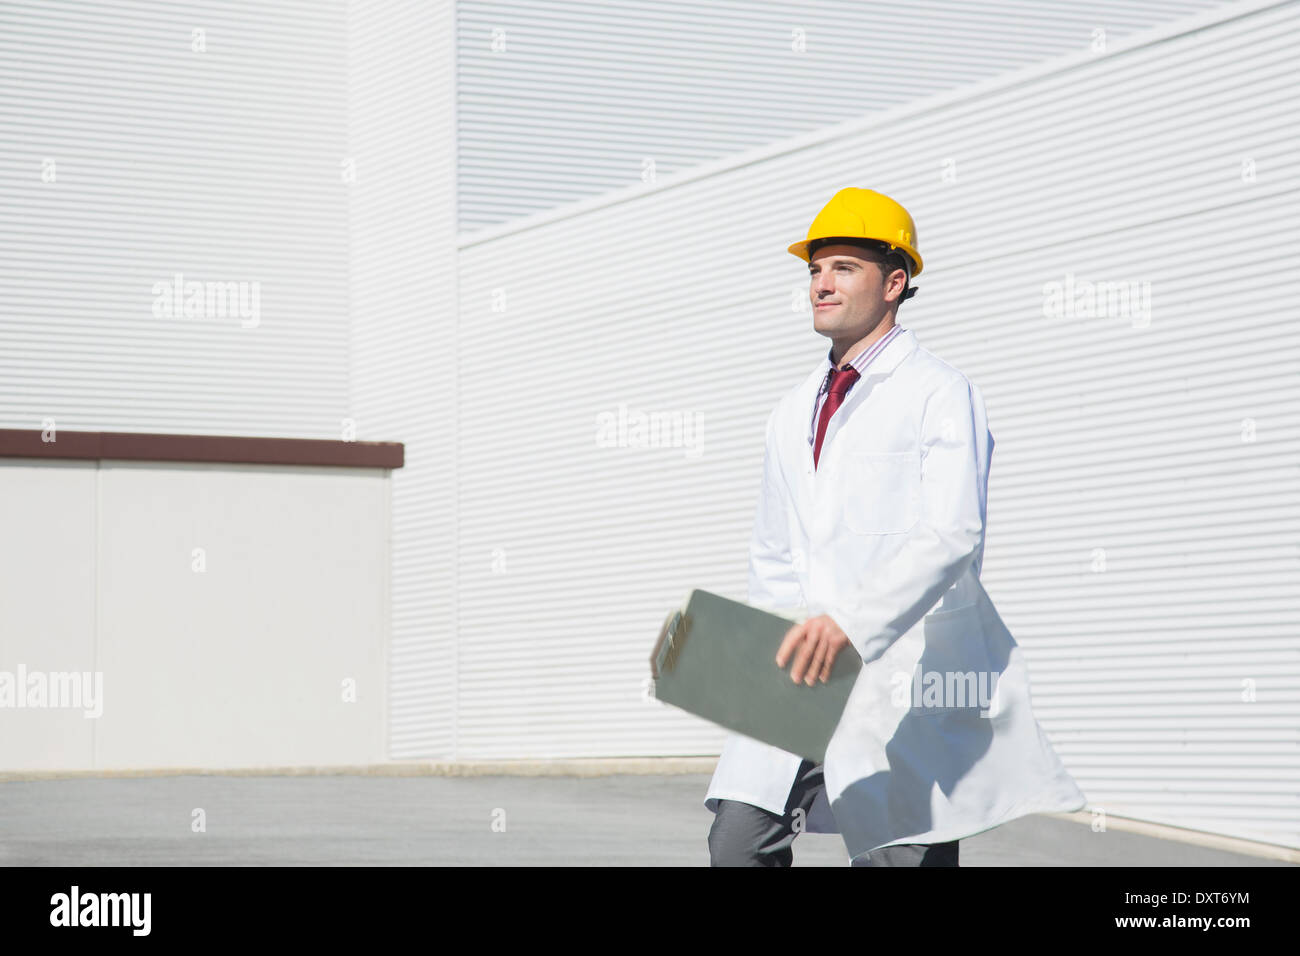 Scientist in hard-hat with clipboard walking outdoors Stock Photo